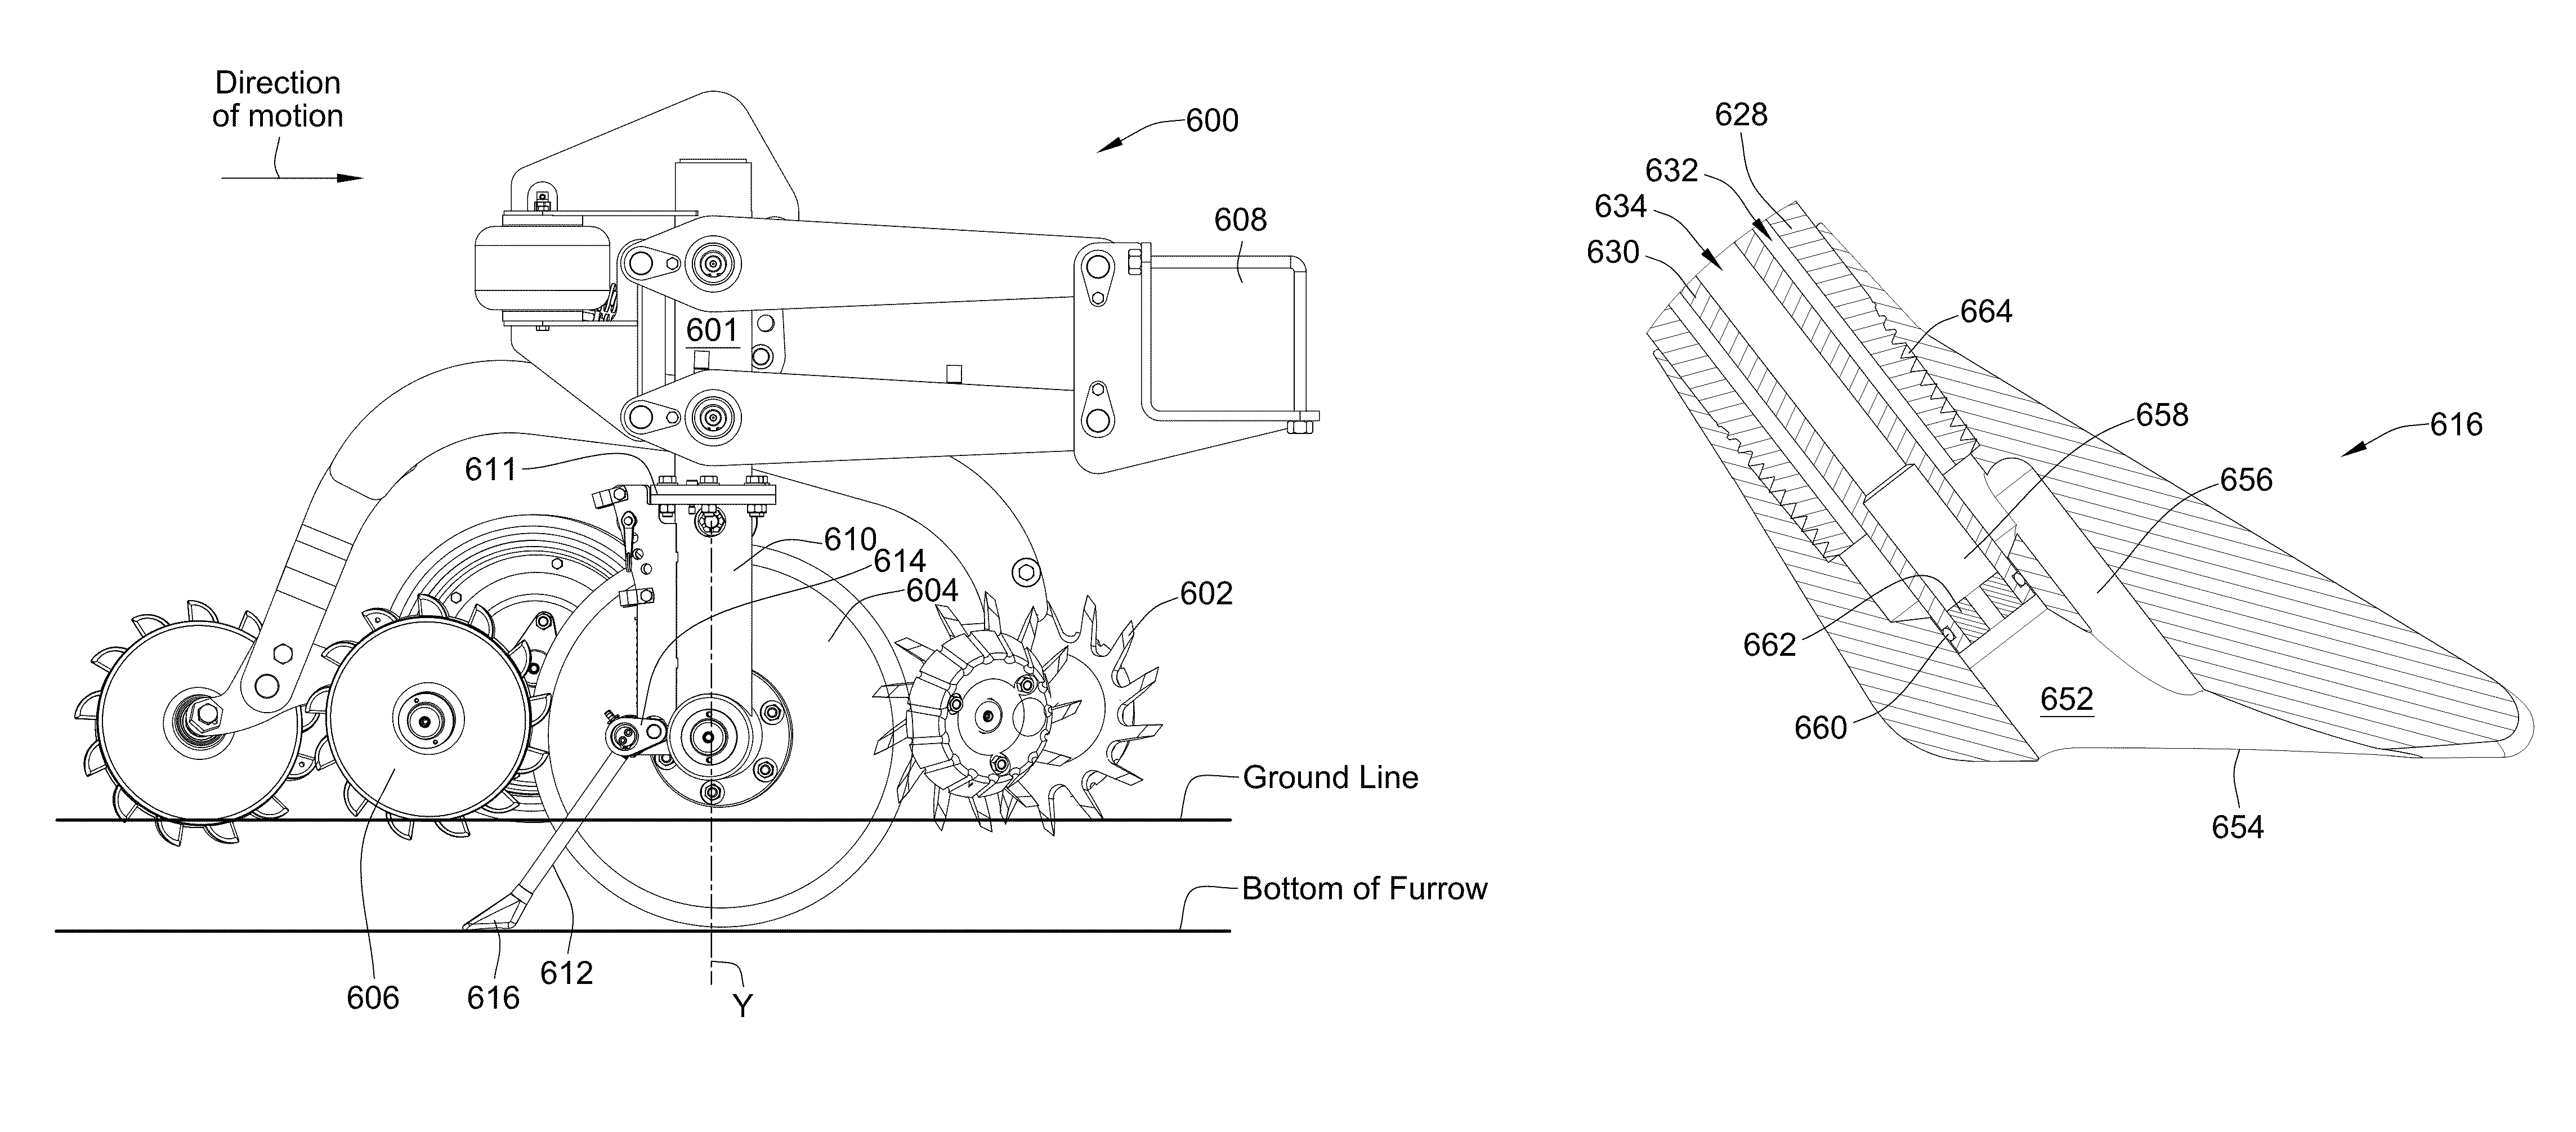 Agricultural implement having fluid delivery features